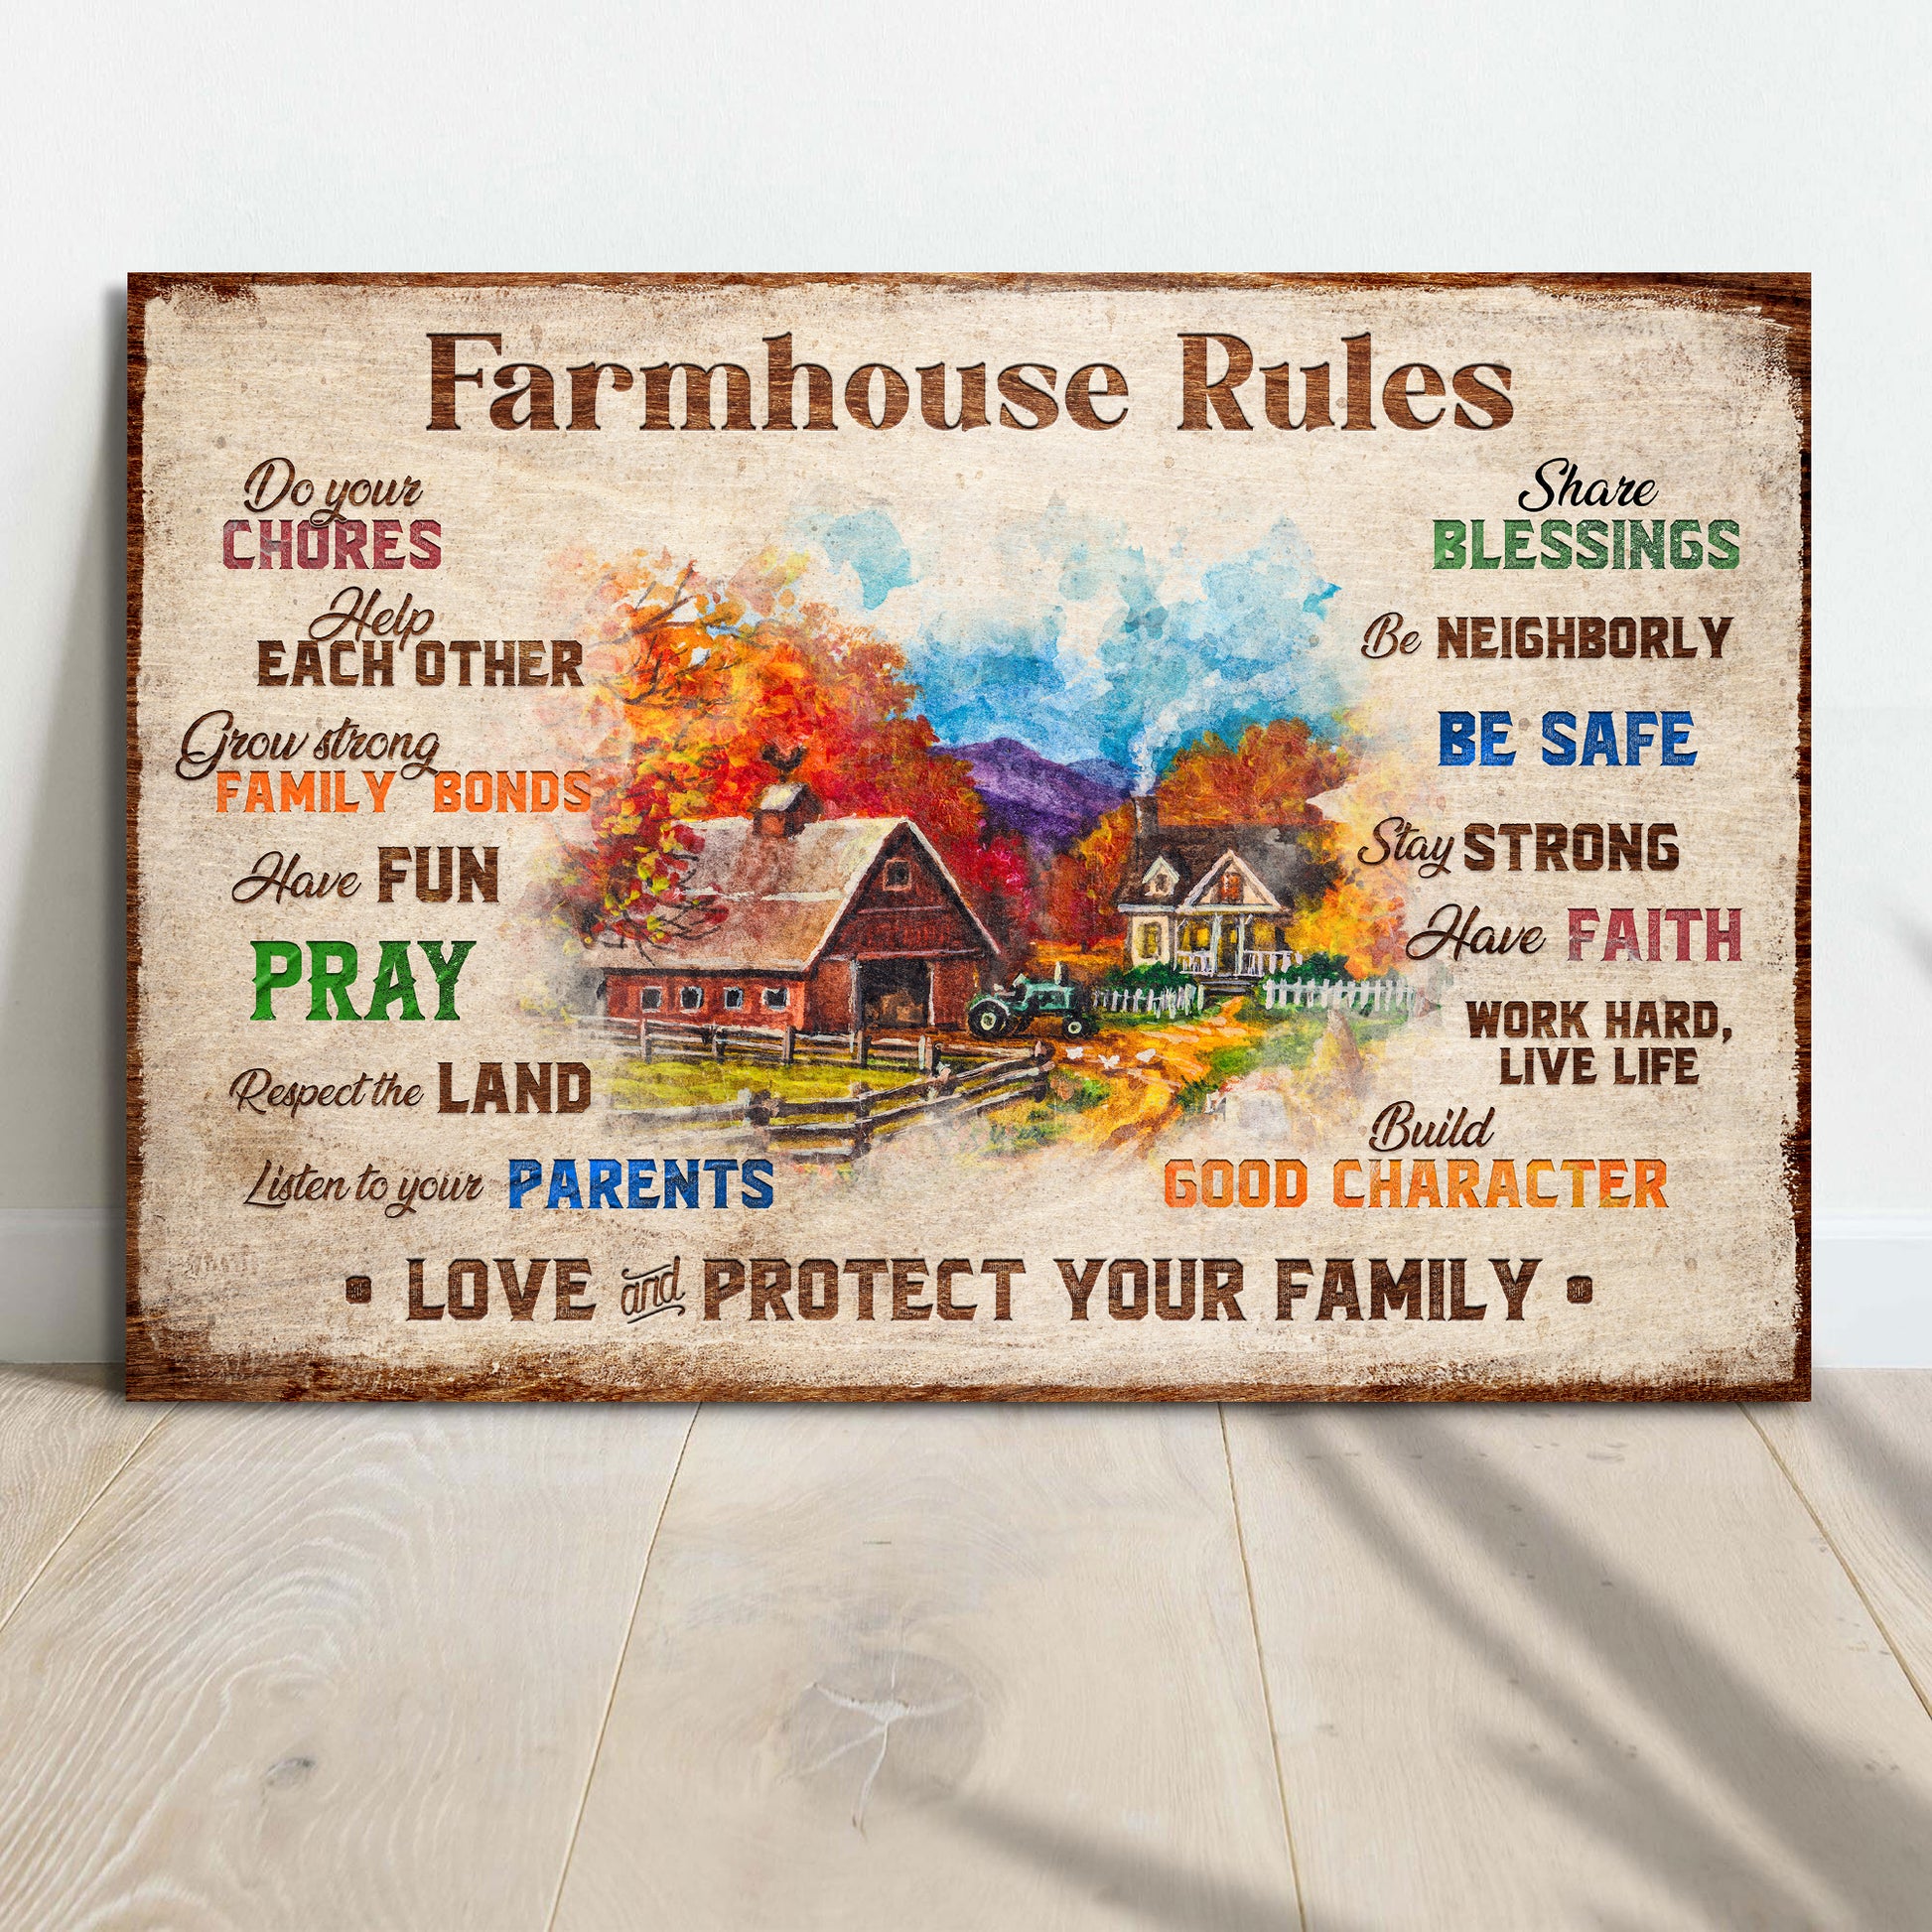 Family Farmhouse Rules Sign - Image by Tailored Canvases